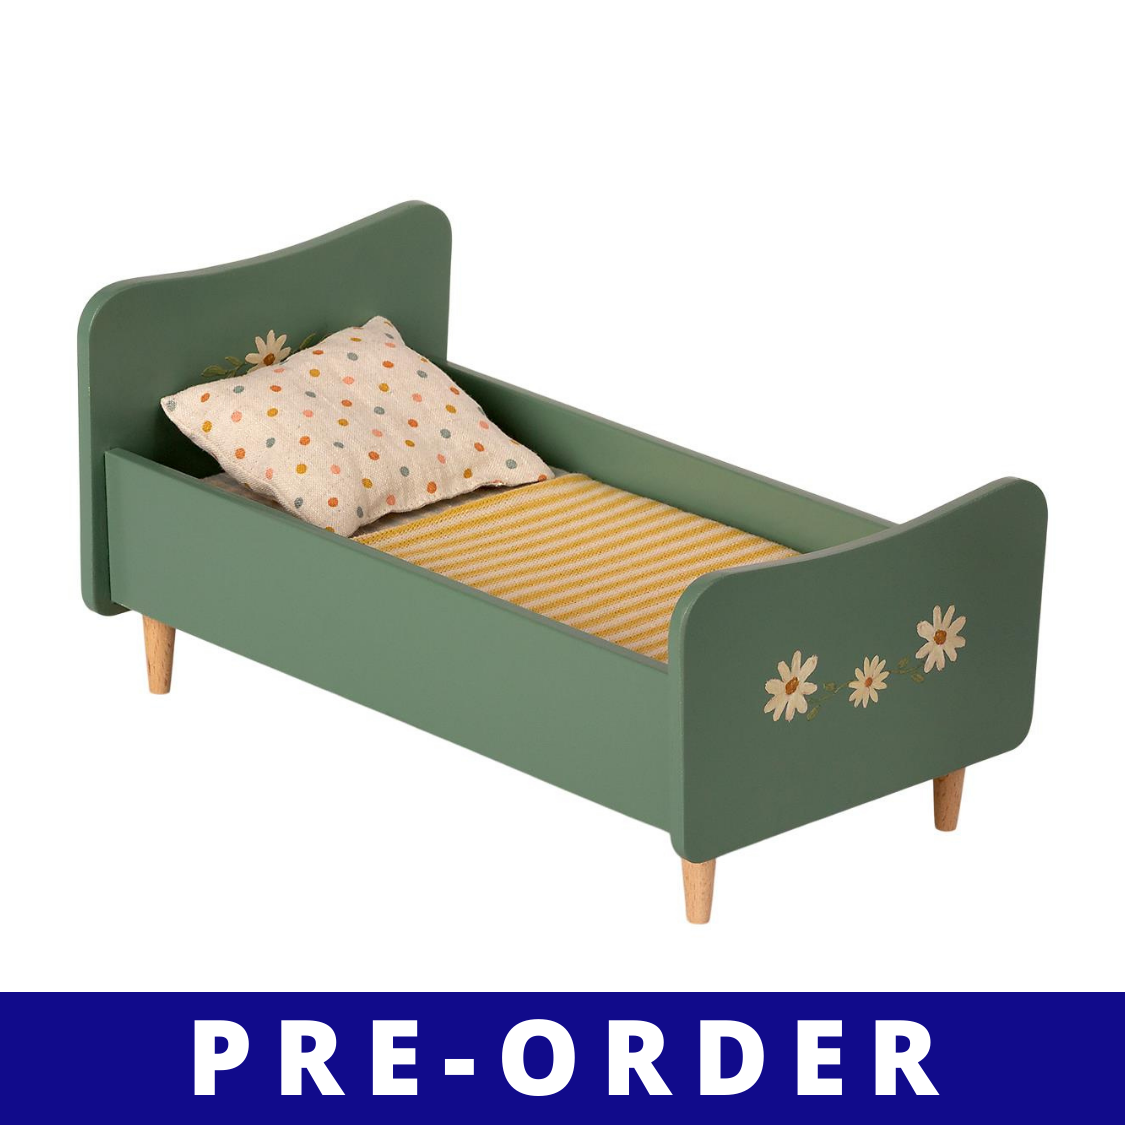 ** Preorder Only** Mint Blue Mini Wooden Bed Dollhouses & Accessories